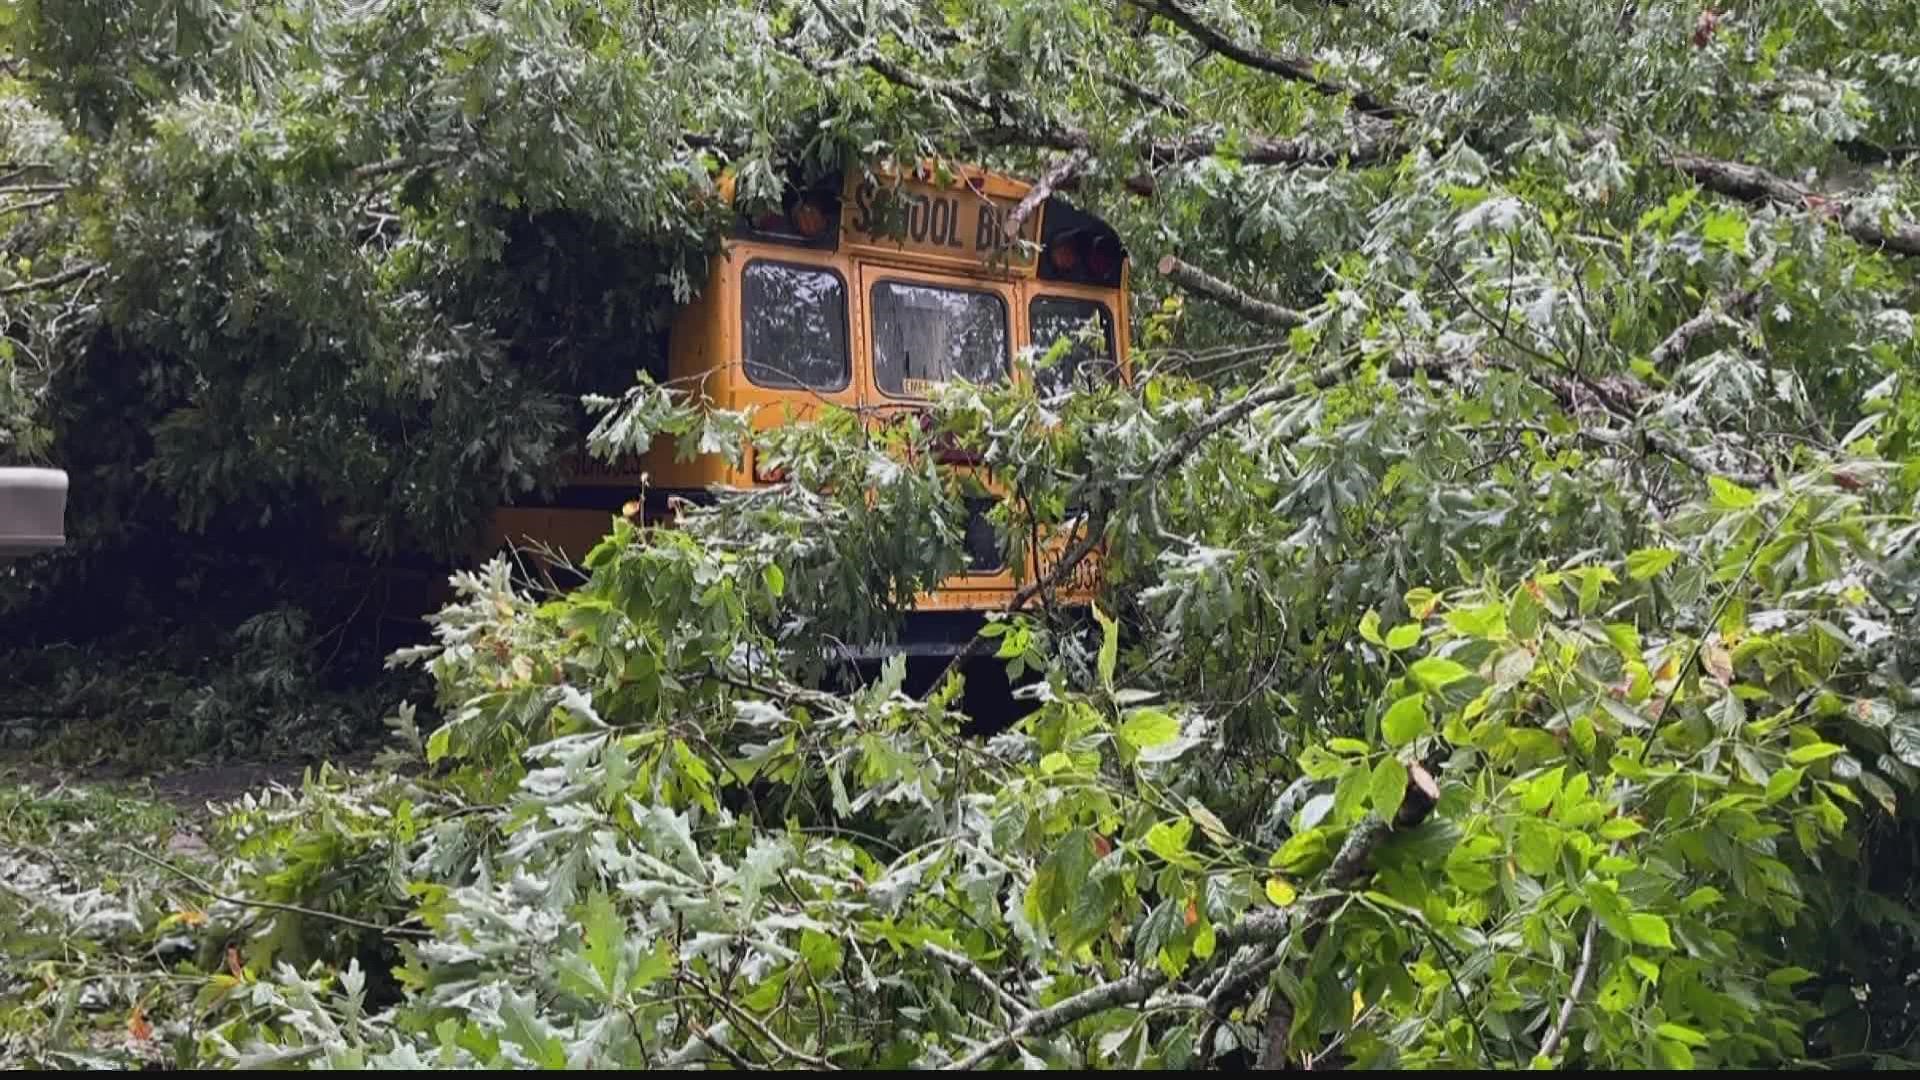 A large tree fell on a school bus this morning in southwest Atlanta, but fortunately there were no serious injuries, police said.